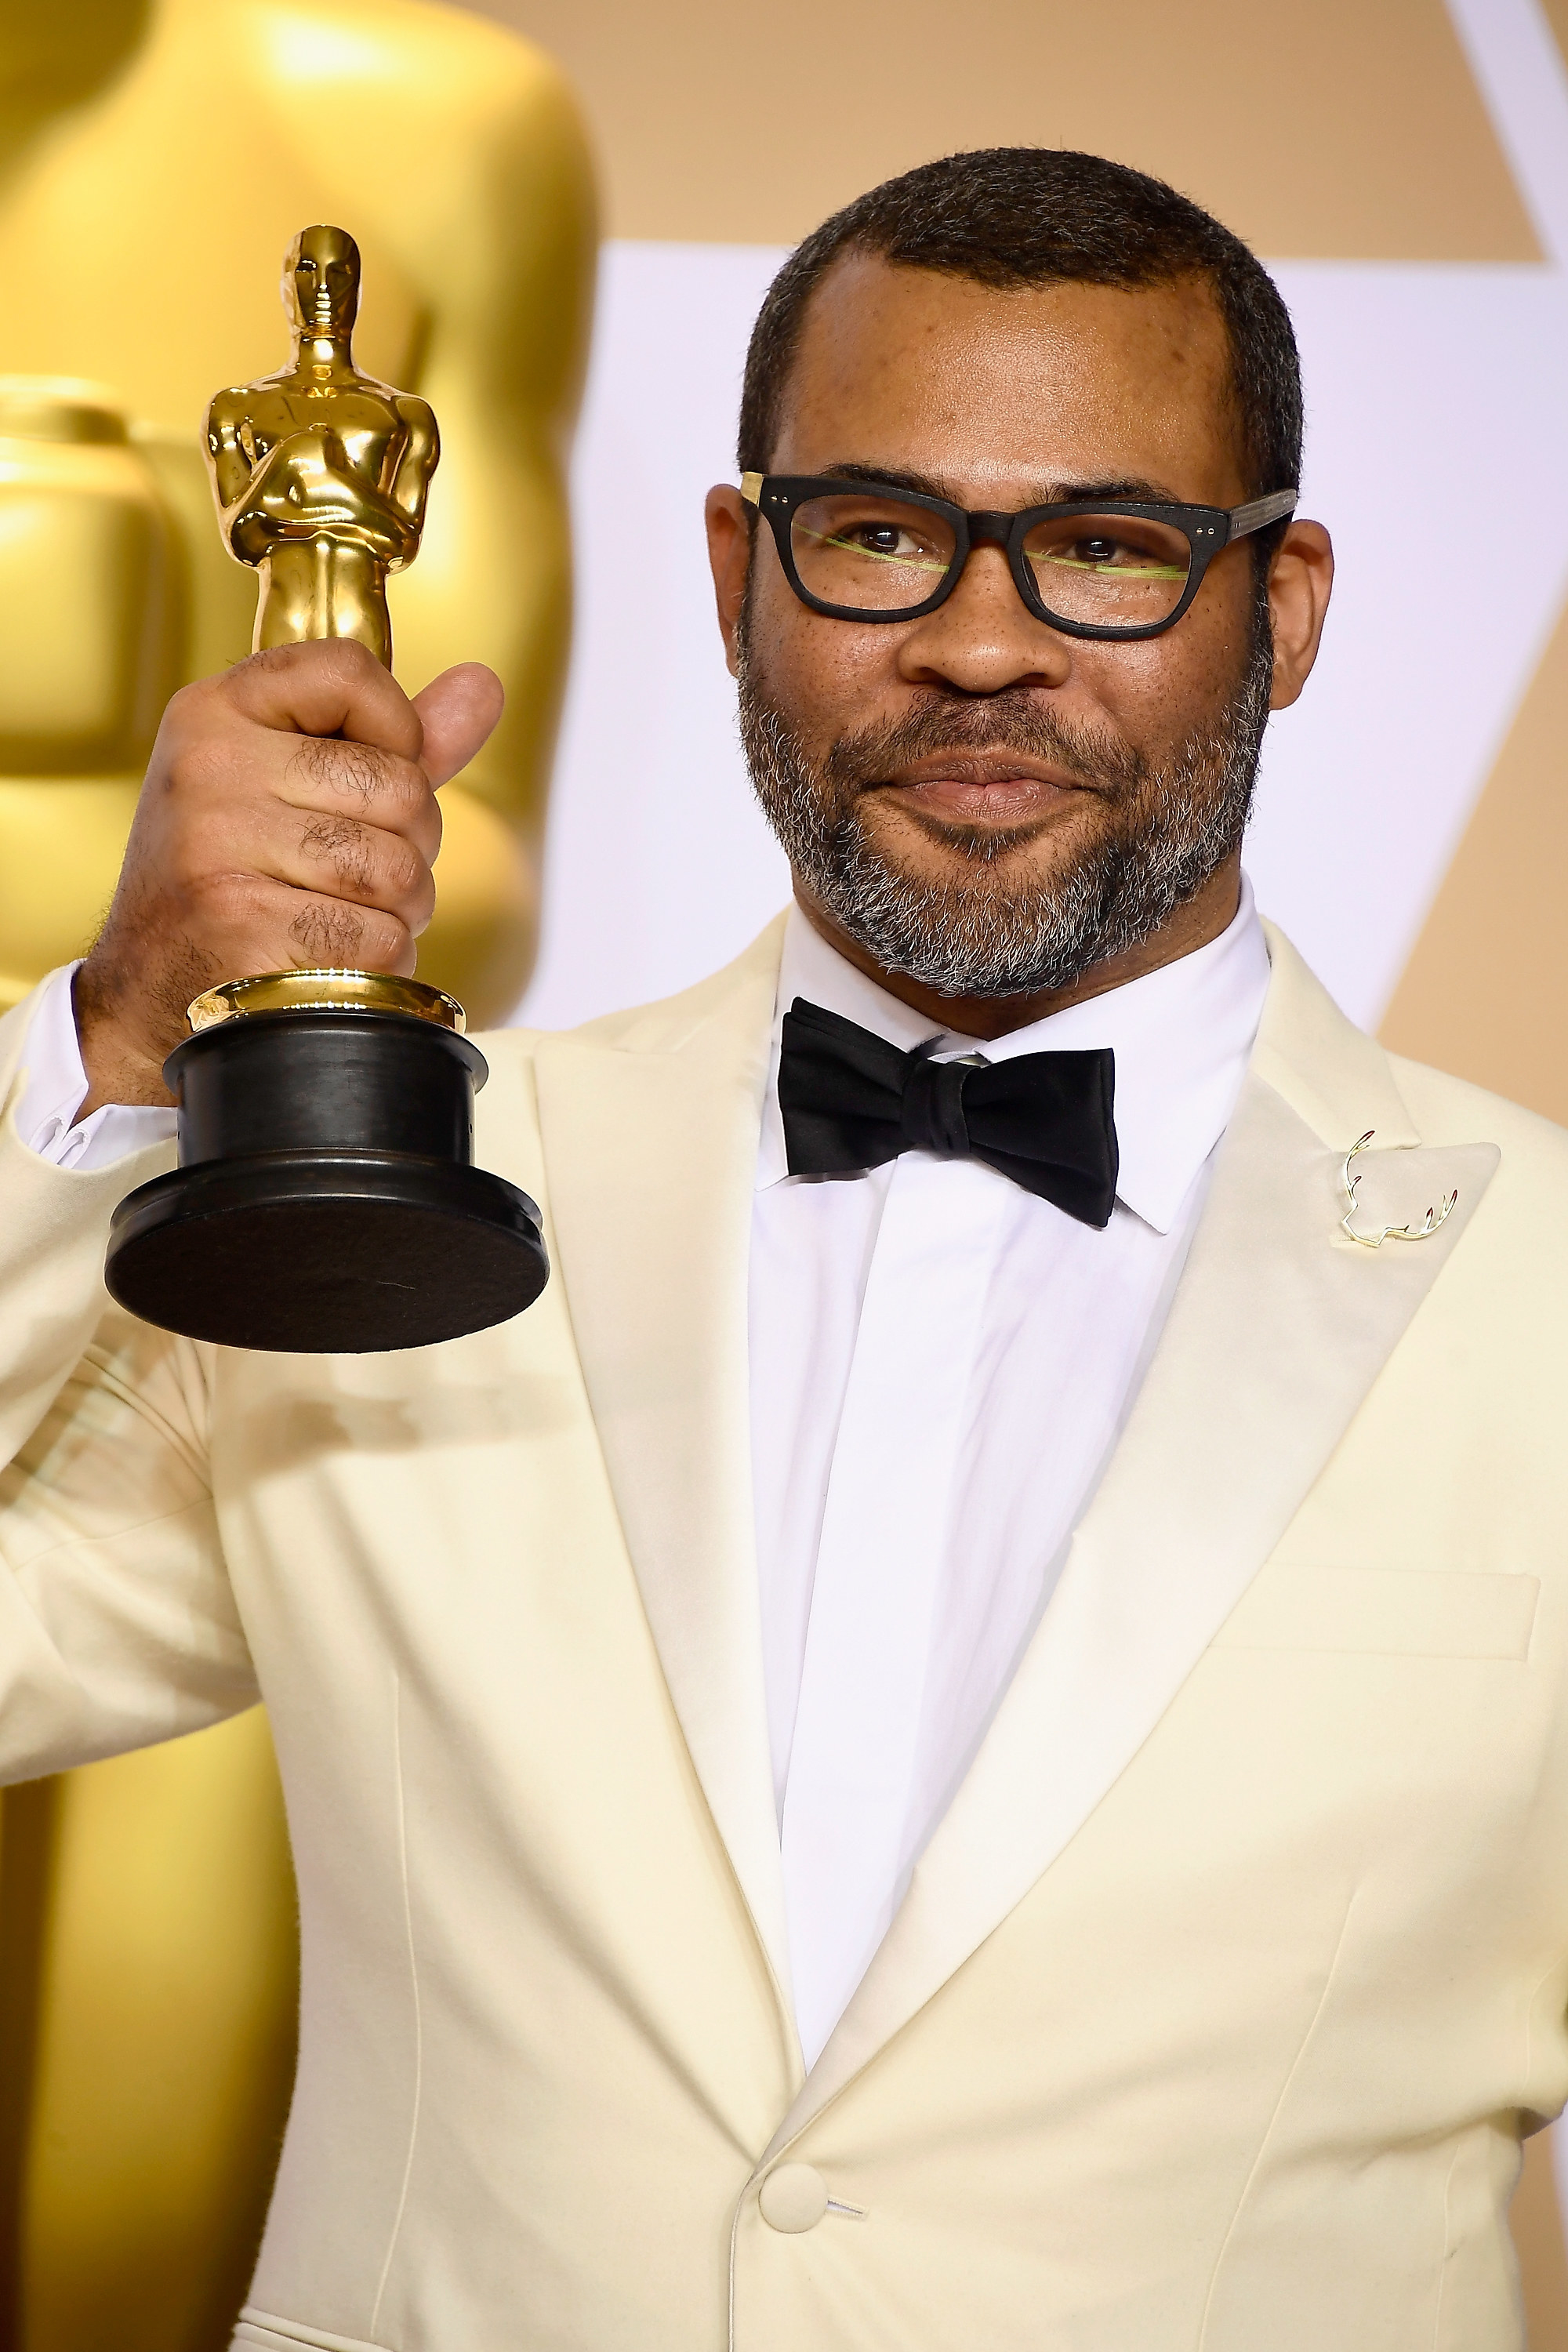 Jordan Peele with his Oscar for Get Out